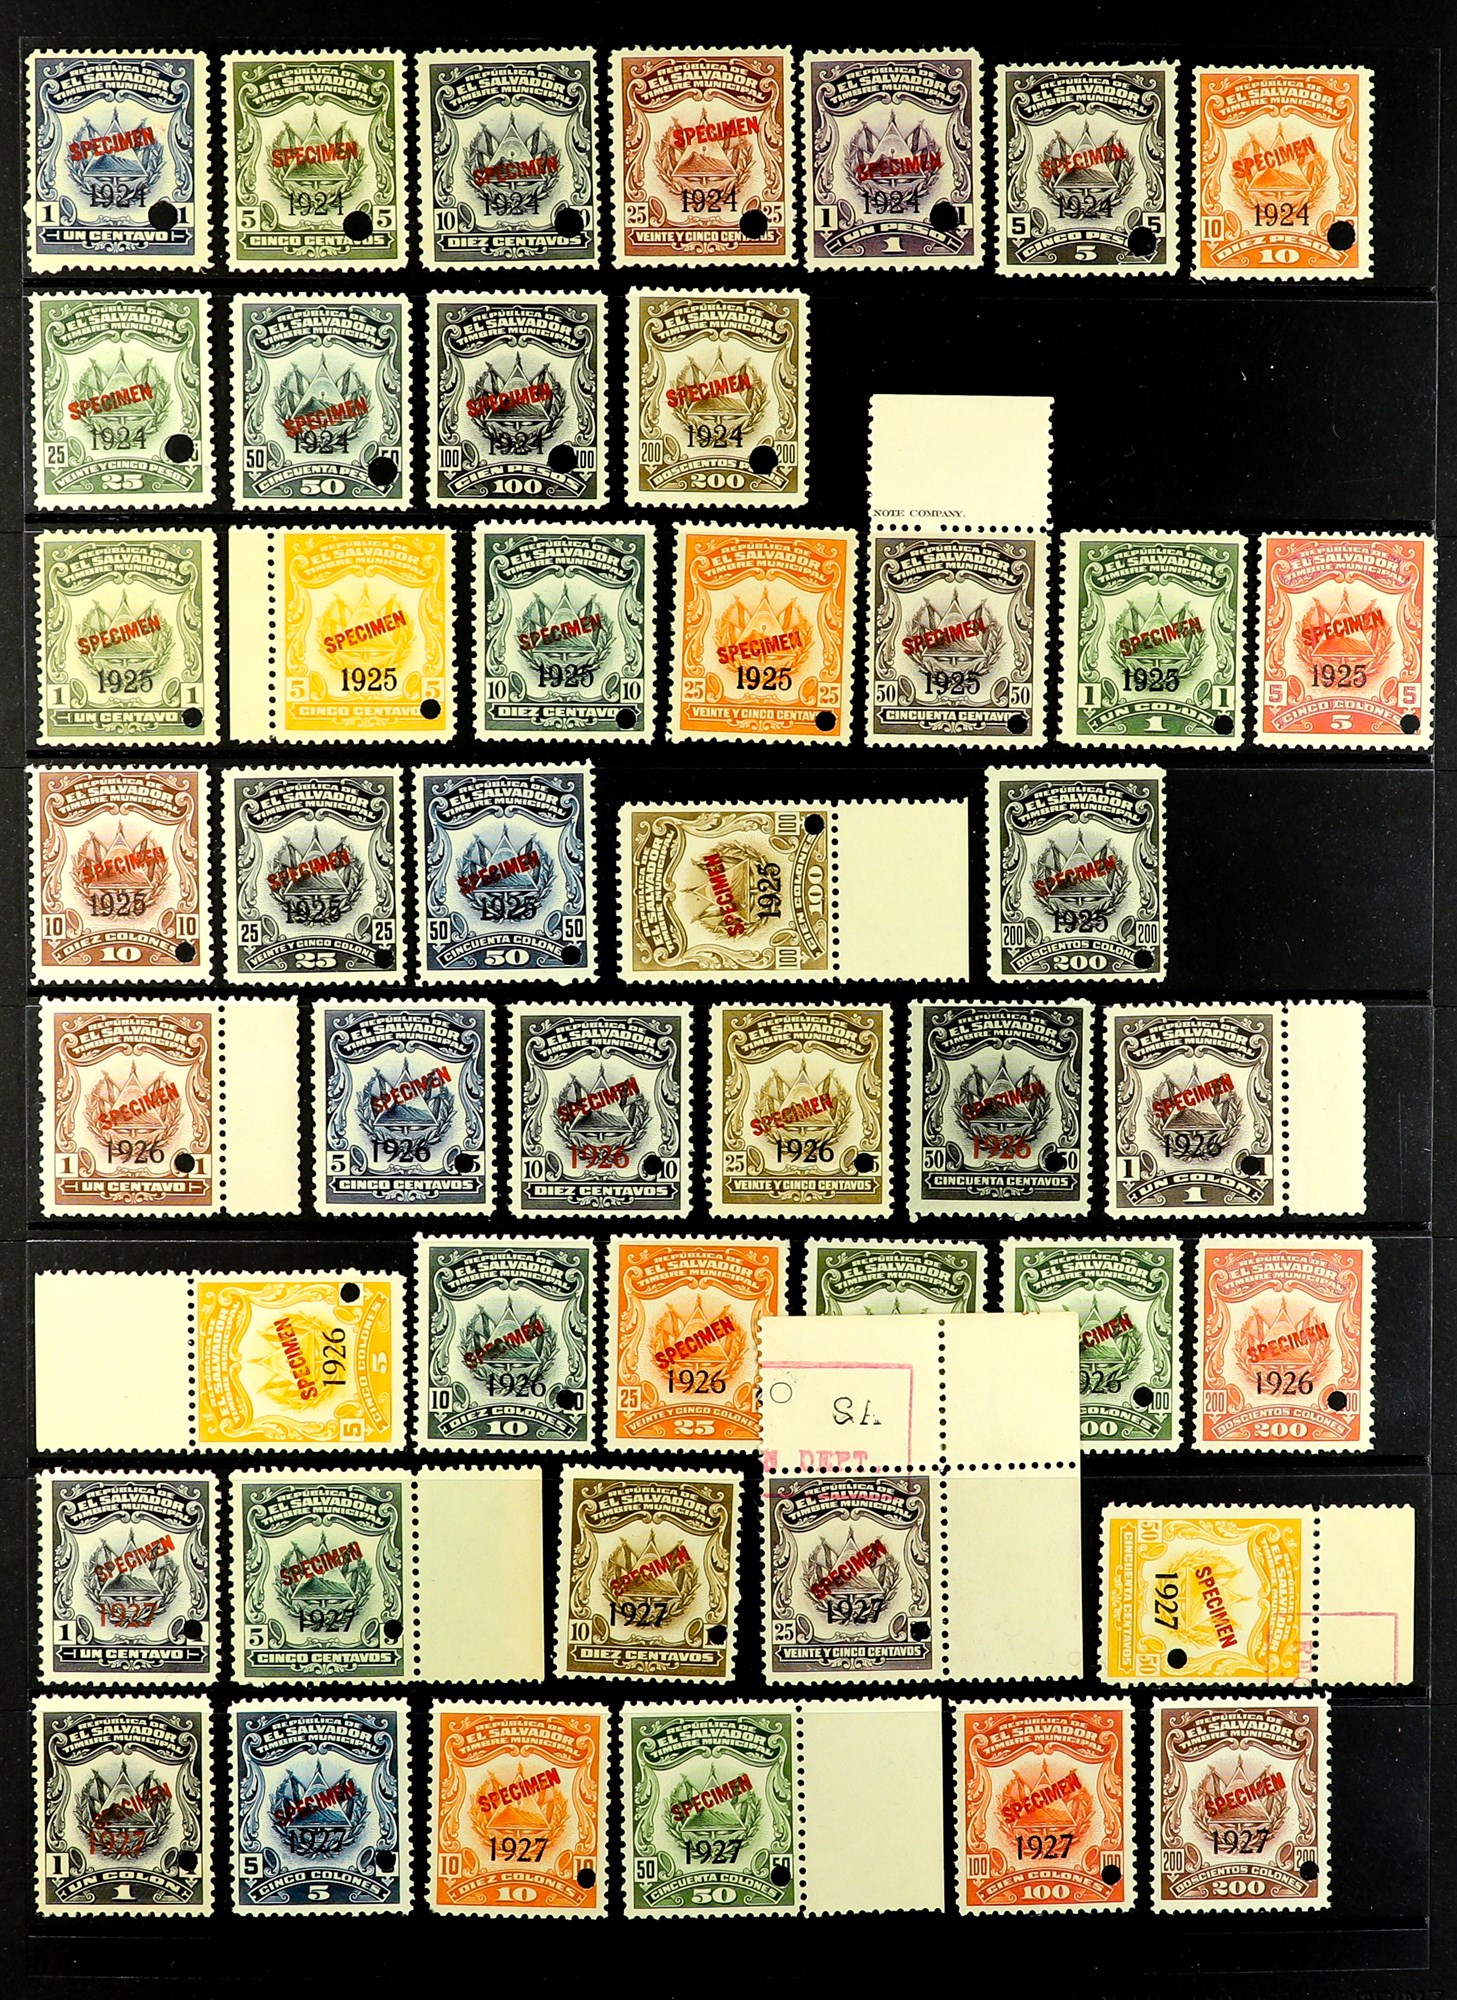 EL SALVADOR 1918 - 1933 'TIMBRE MUNICIPAL' REVENUE STAMPS collection of 180+ never hinged mint - Image 3 of 5